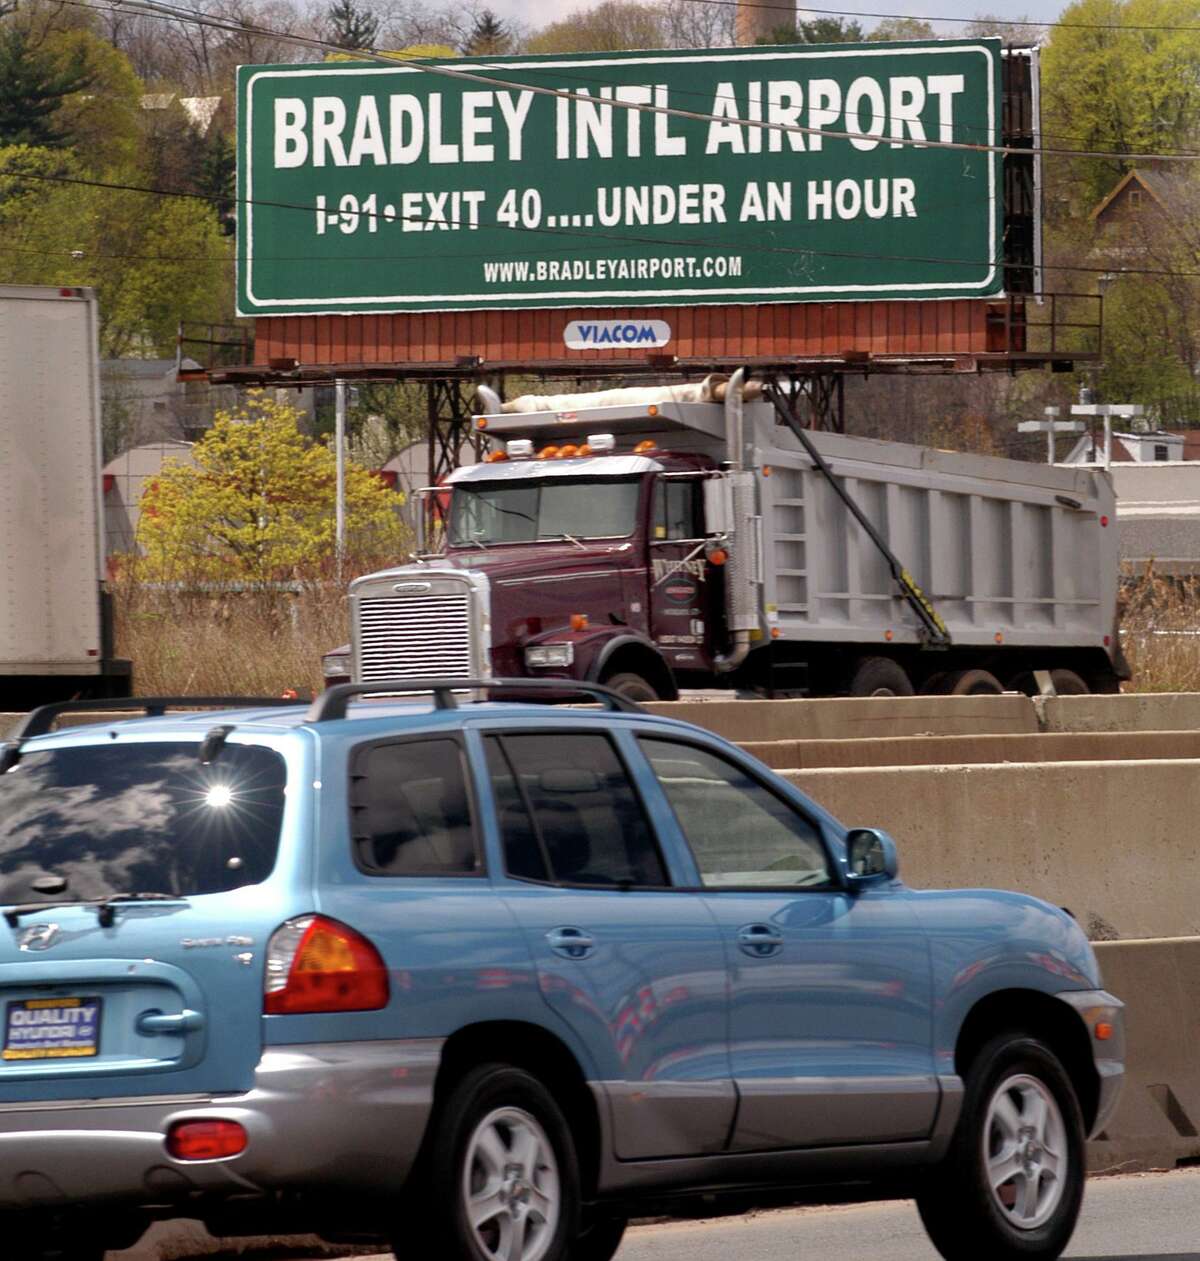 A sign along I-95 near the New Haven /East Haven line, states that Bradley International Airport can be reached in less than 1 hour.